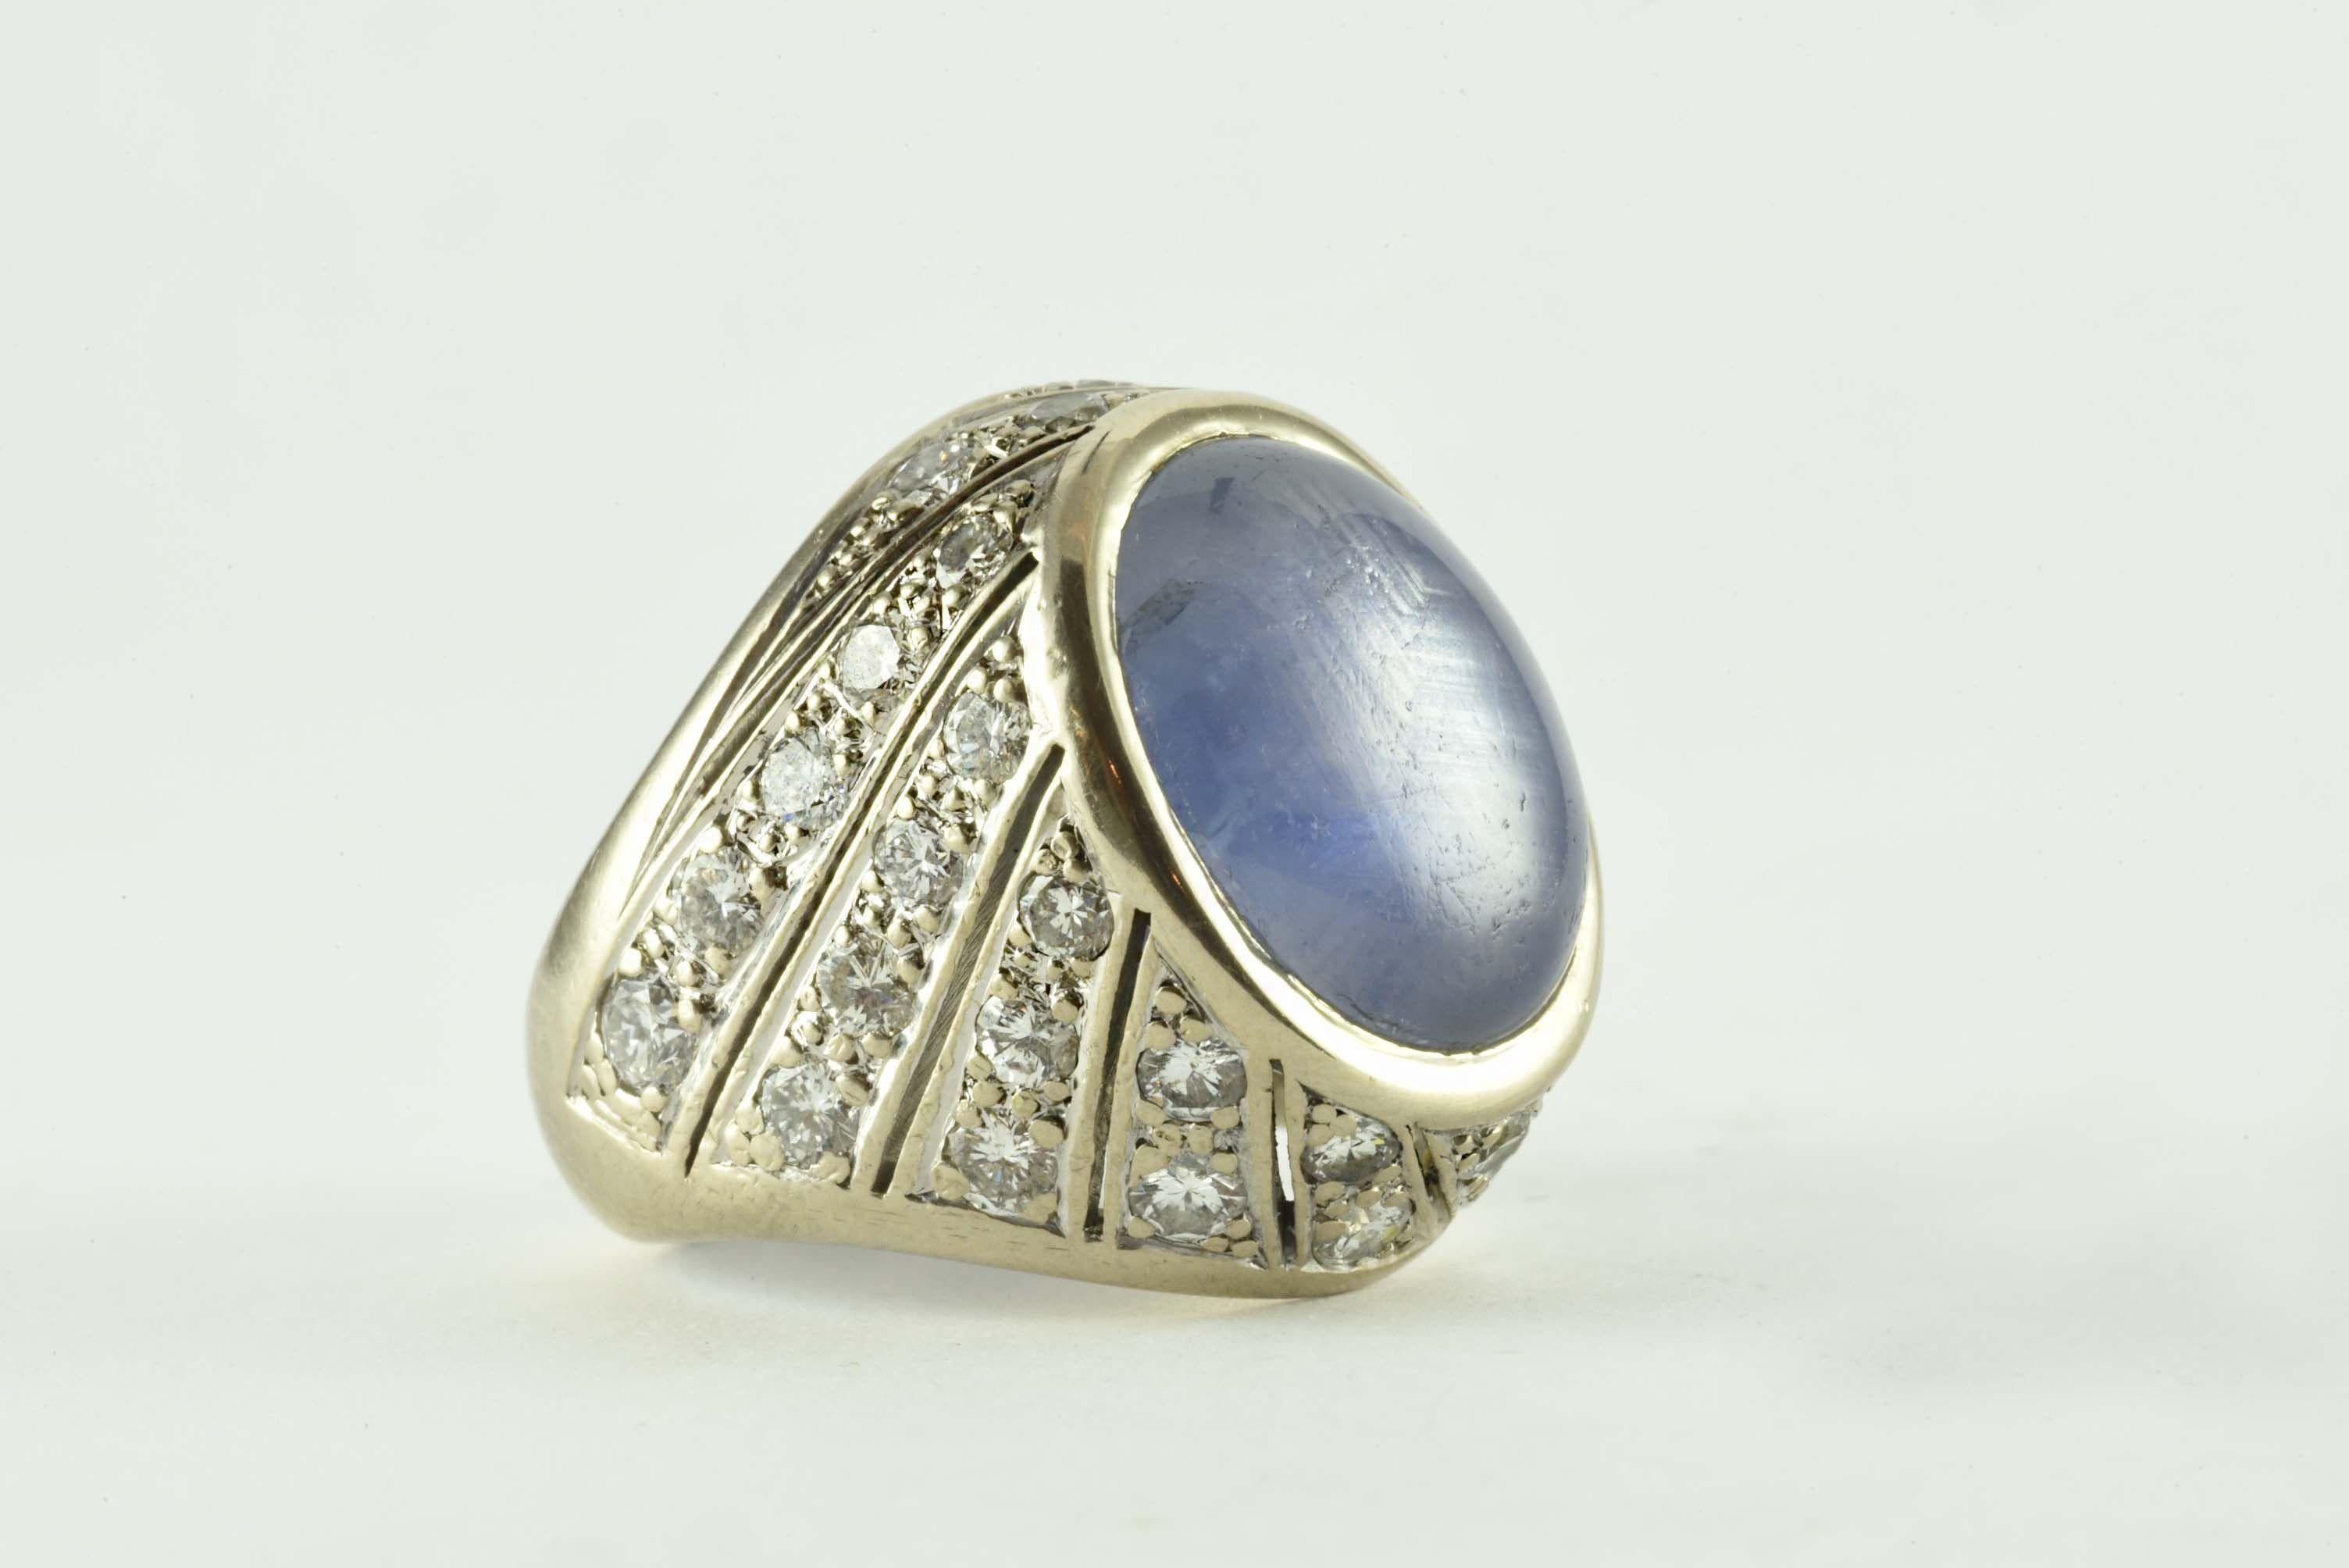 This natural oval-shaped cabochon pale blue star sapphire measuring 14 X 12mm is surrounded on all sides by thirty-six round diamonds in diagonal rows totaling approximately 1.50 carats, G-H color, SI1 clarity and mounted in 18 karat white gold. 
